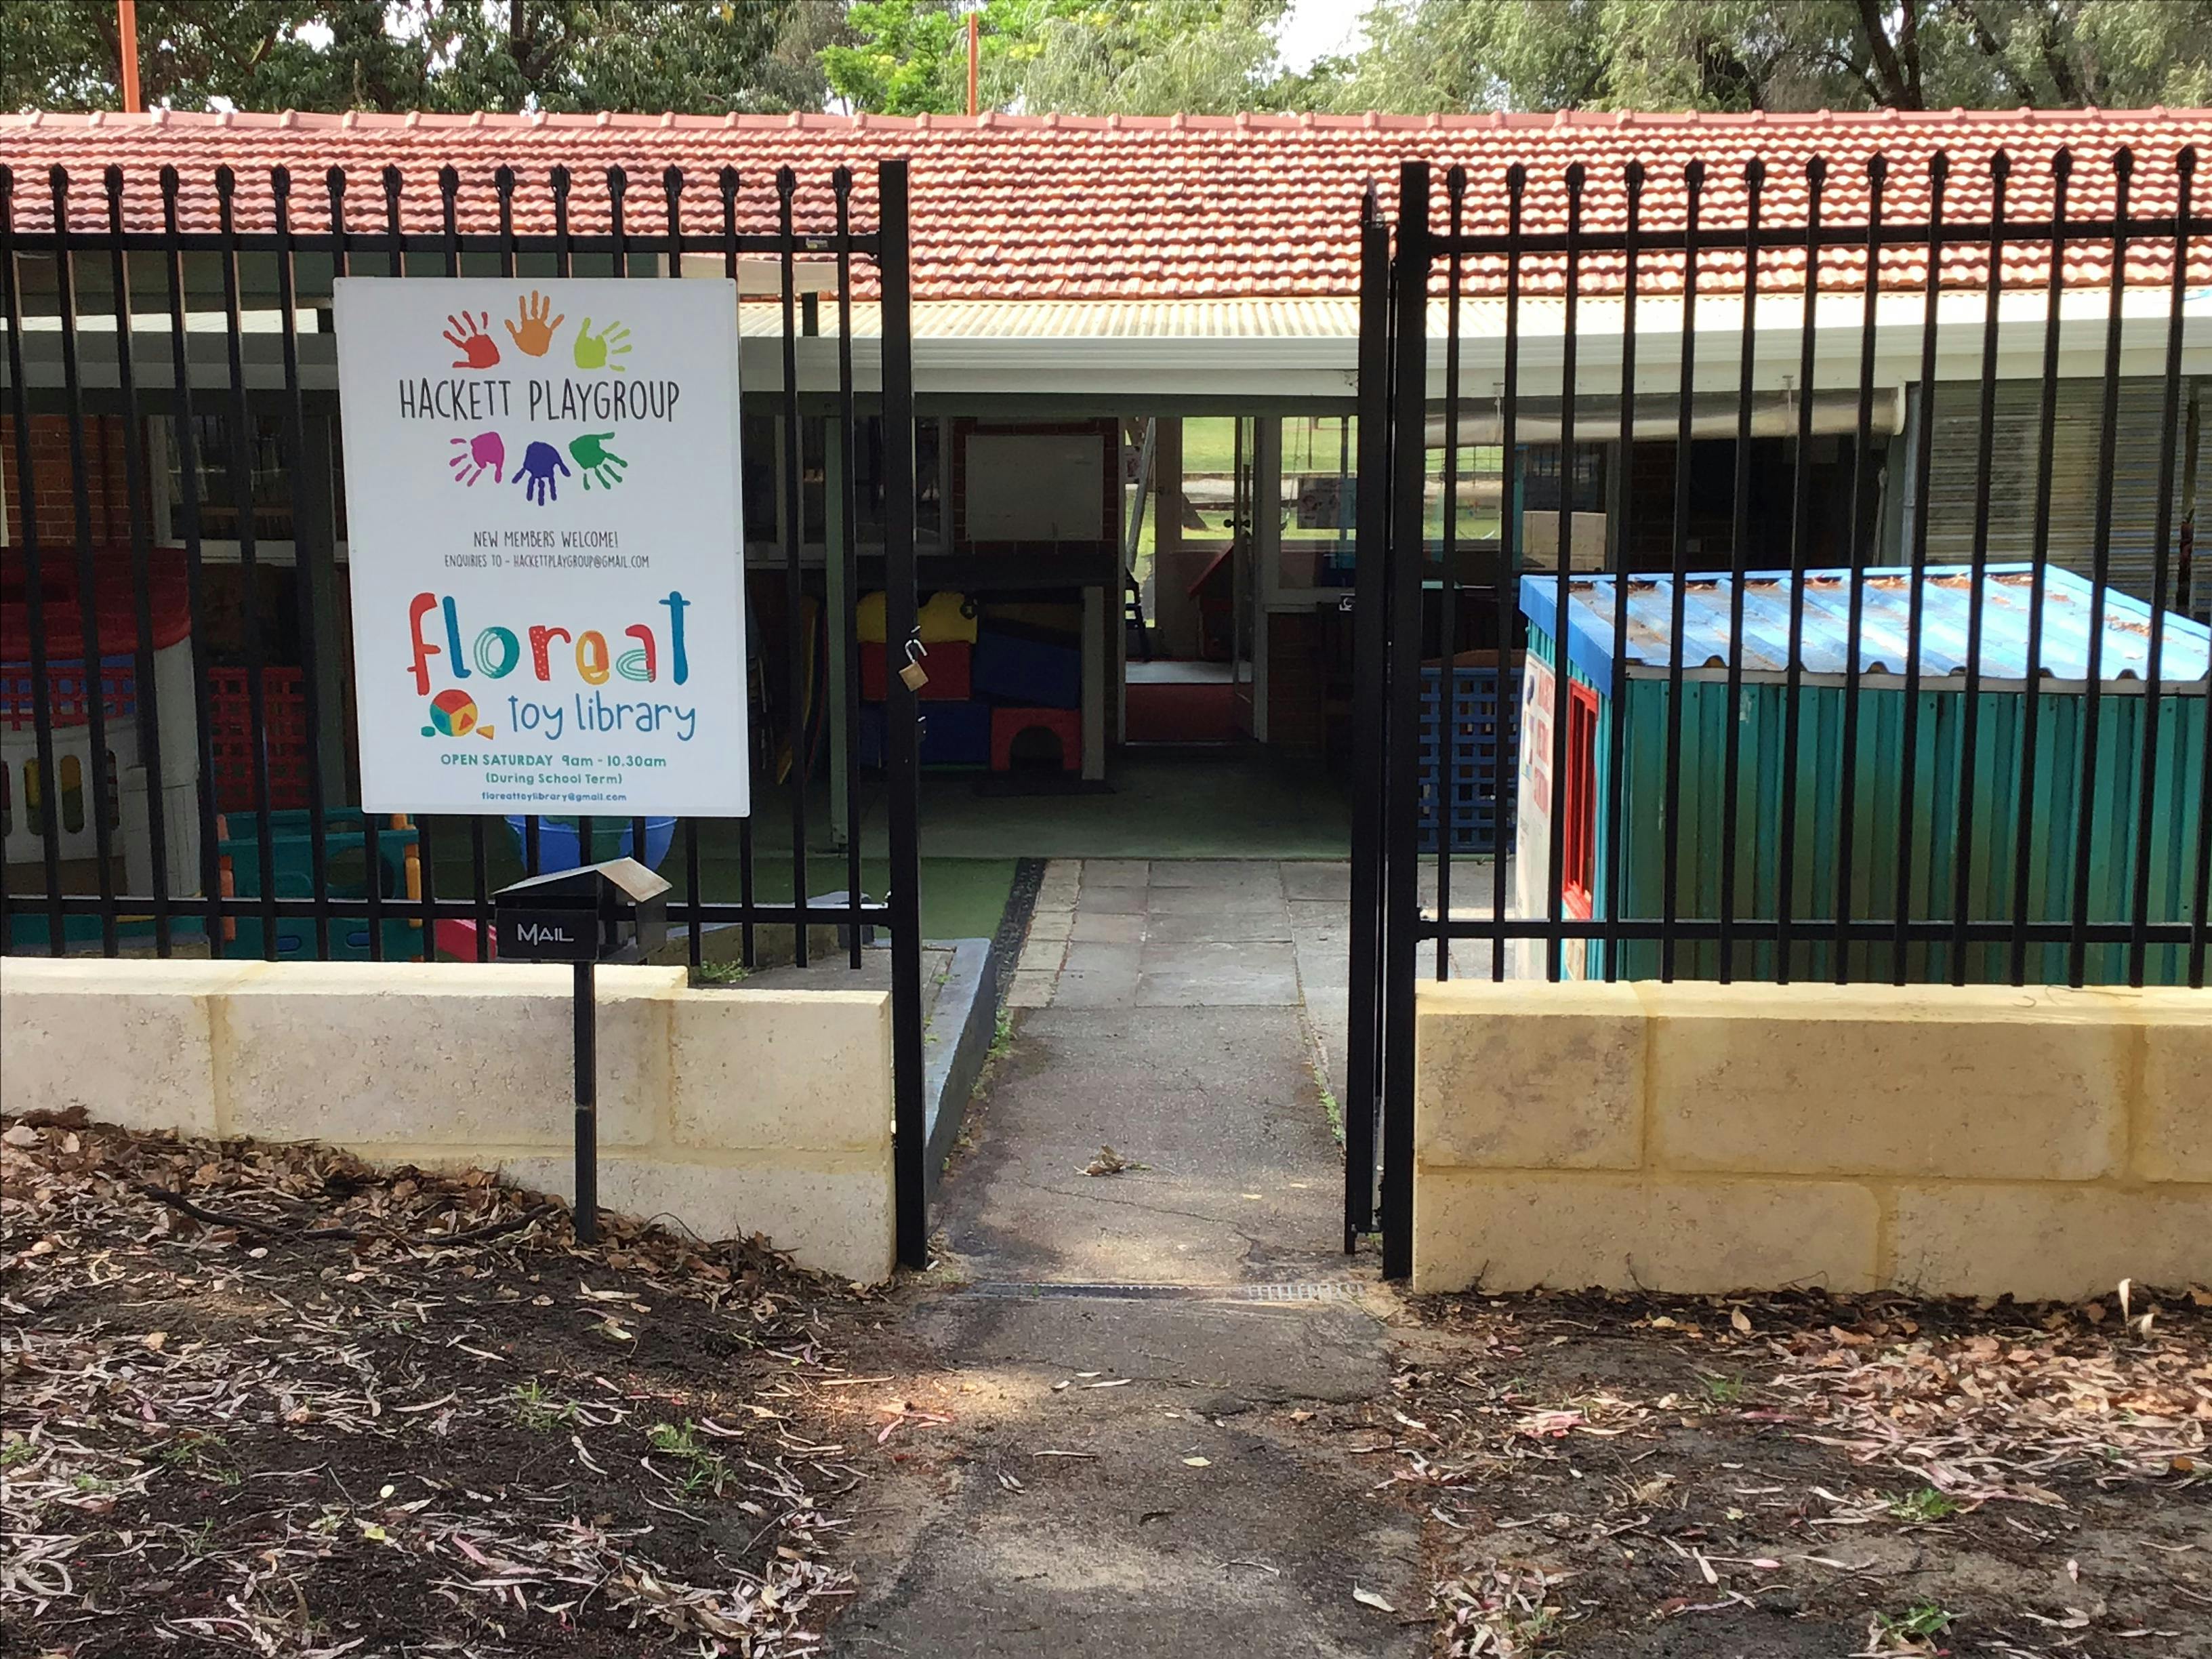 Hackett Playgroup and Floreat Toy Library